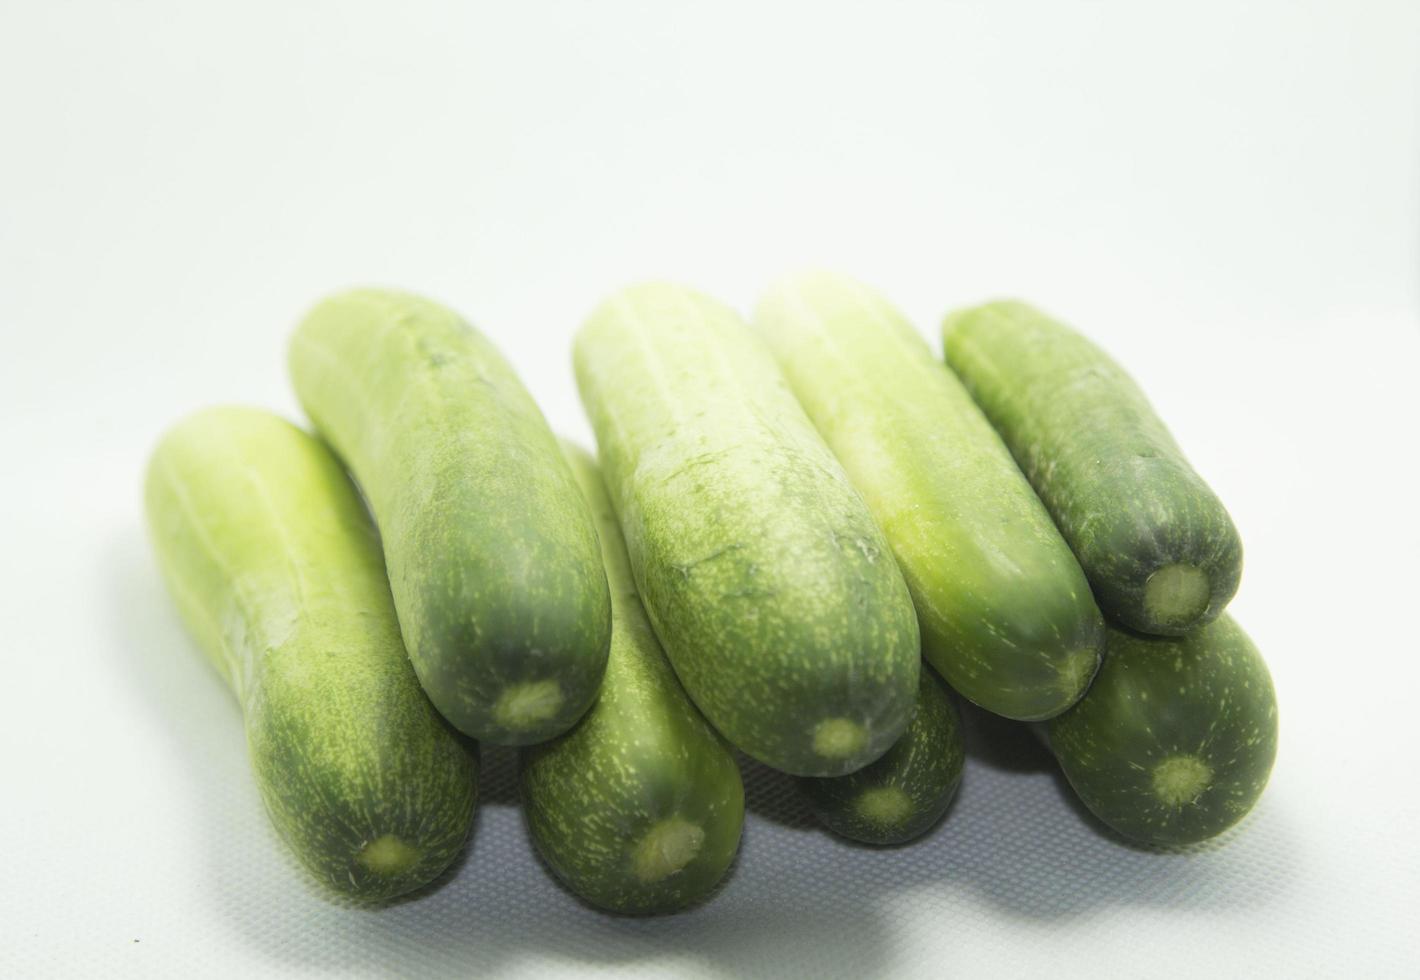 Green cucumbers are sweet and crispy, planted organically for health and body on a separate white background. photo